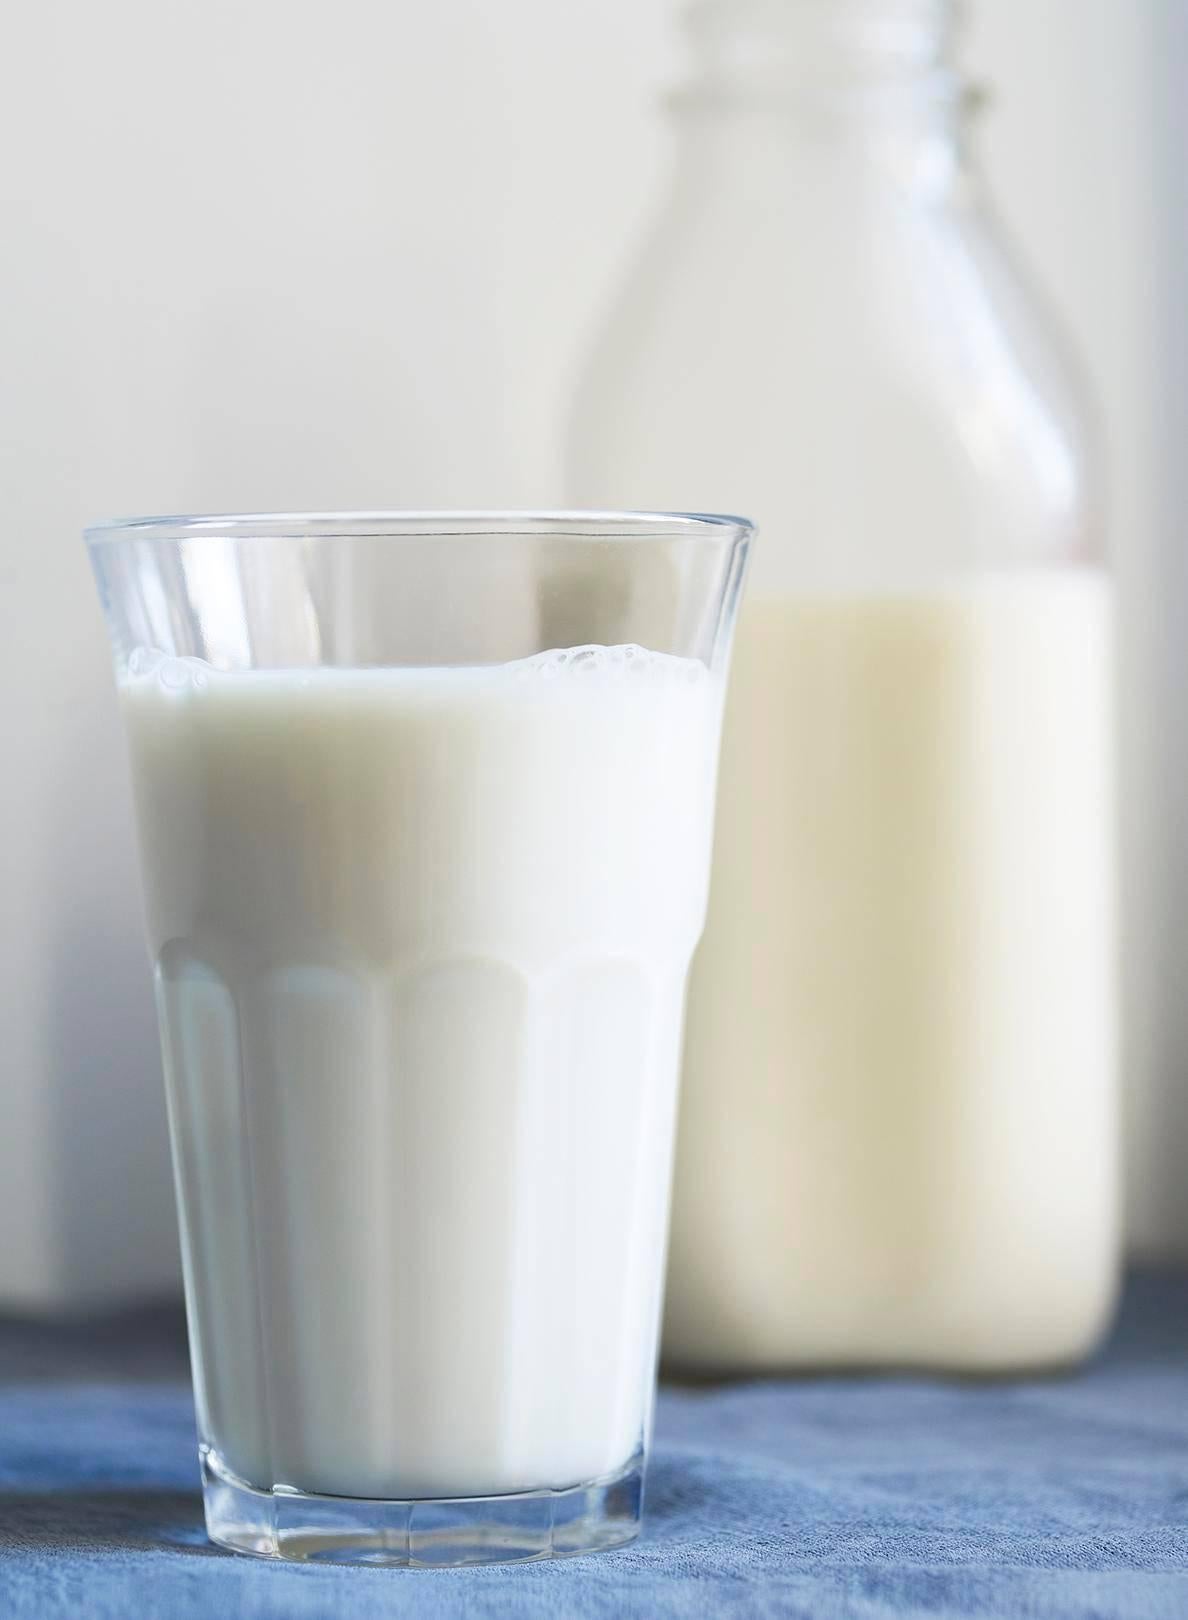 "Glass of Milk with Bottle" Modern Photography Still-Life Food